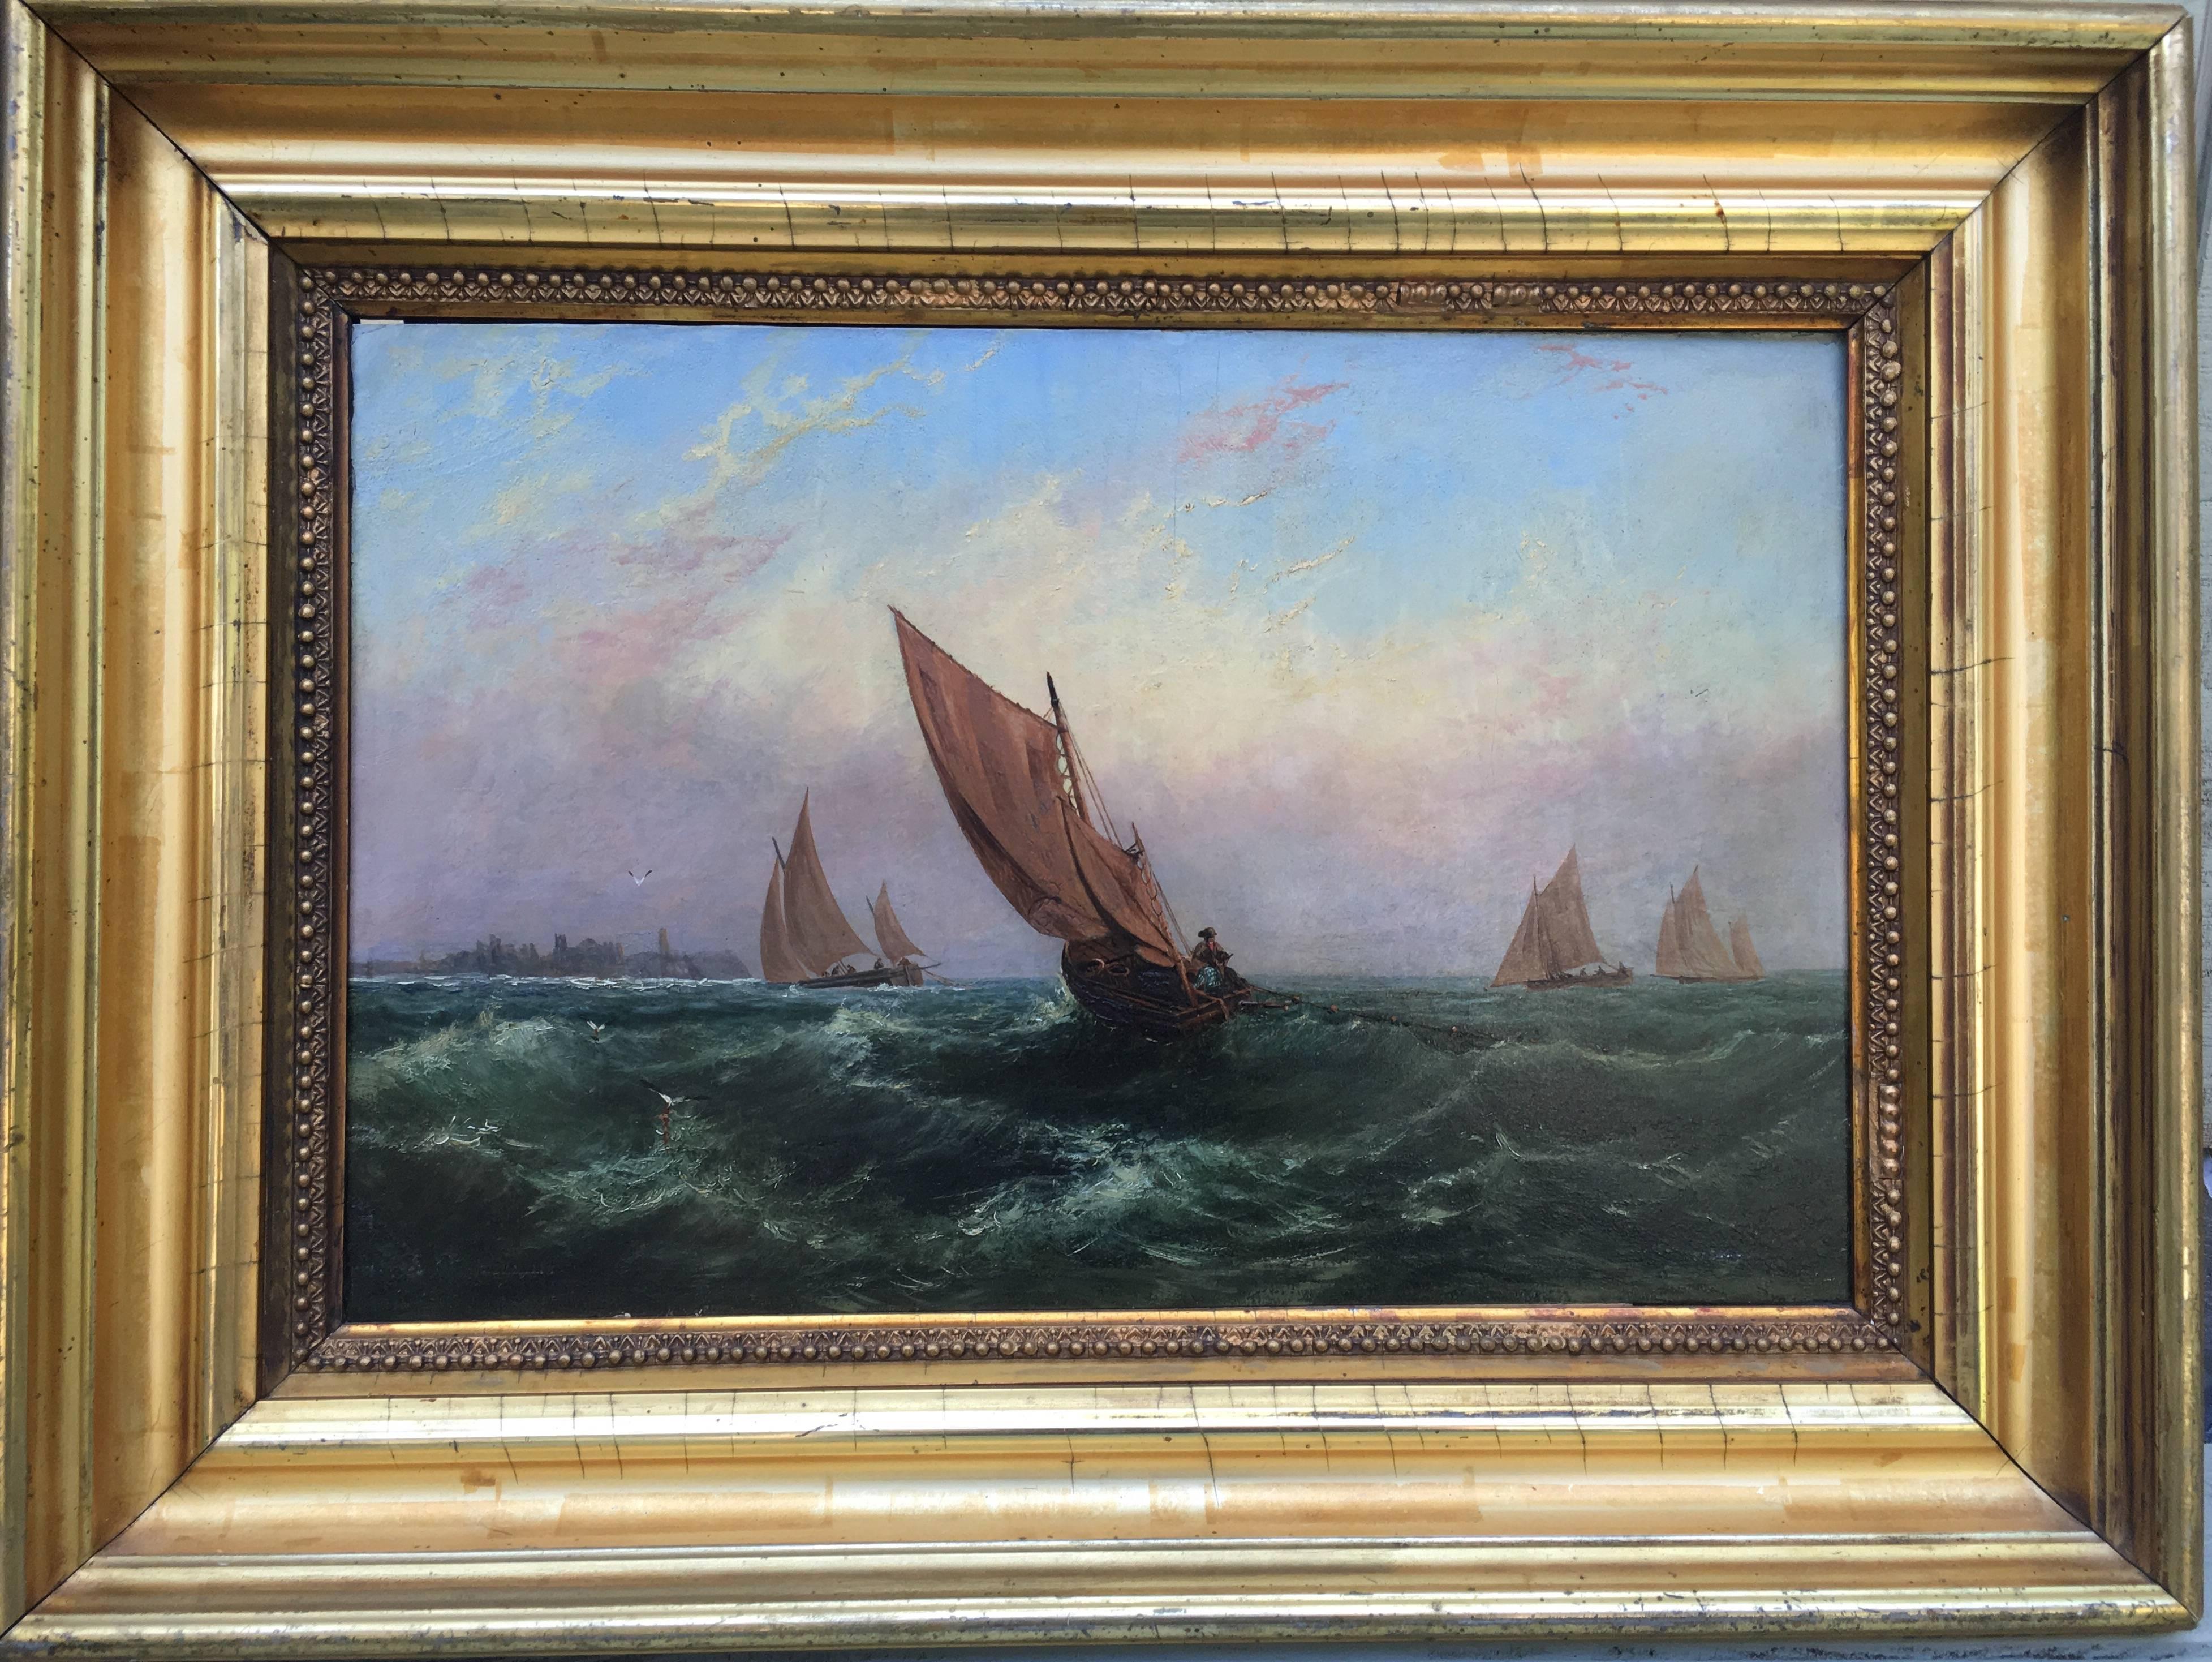 Unknown Landscape Painting - Sailboats on a Rough Sea